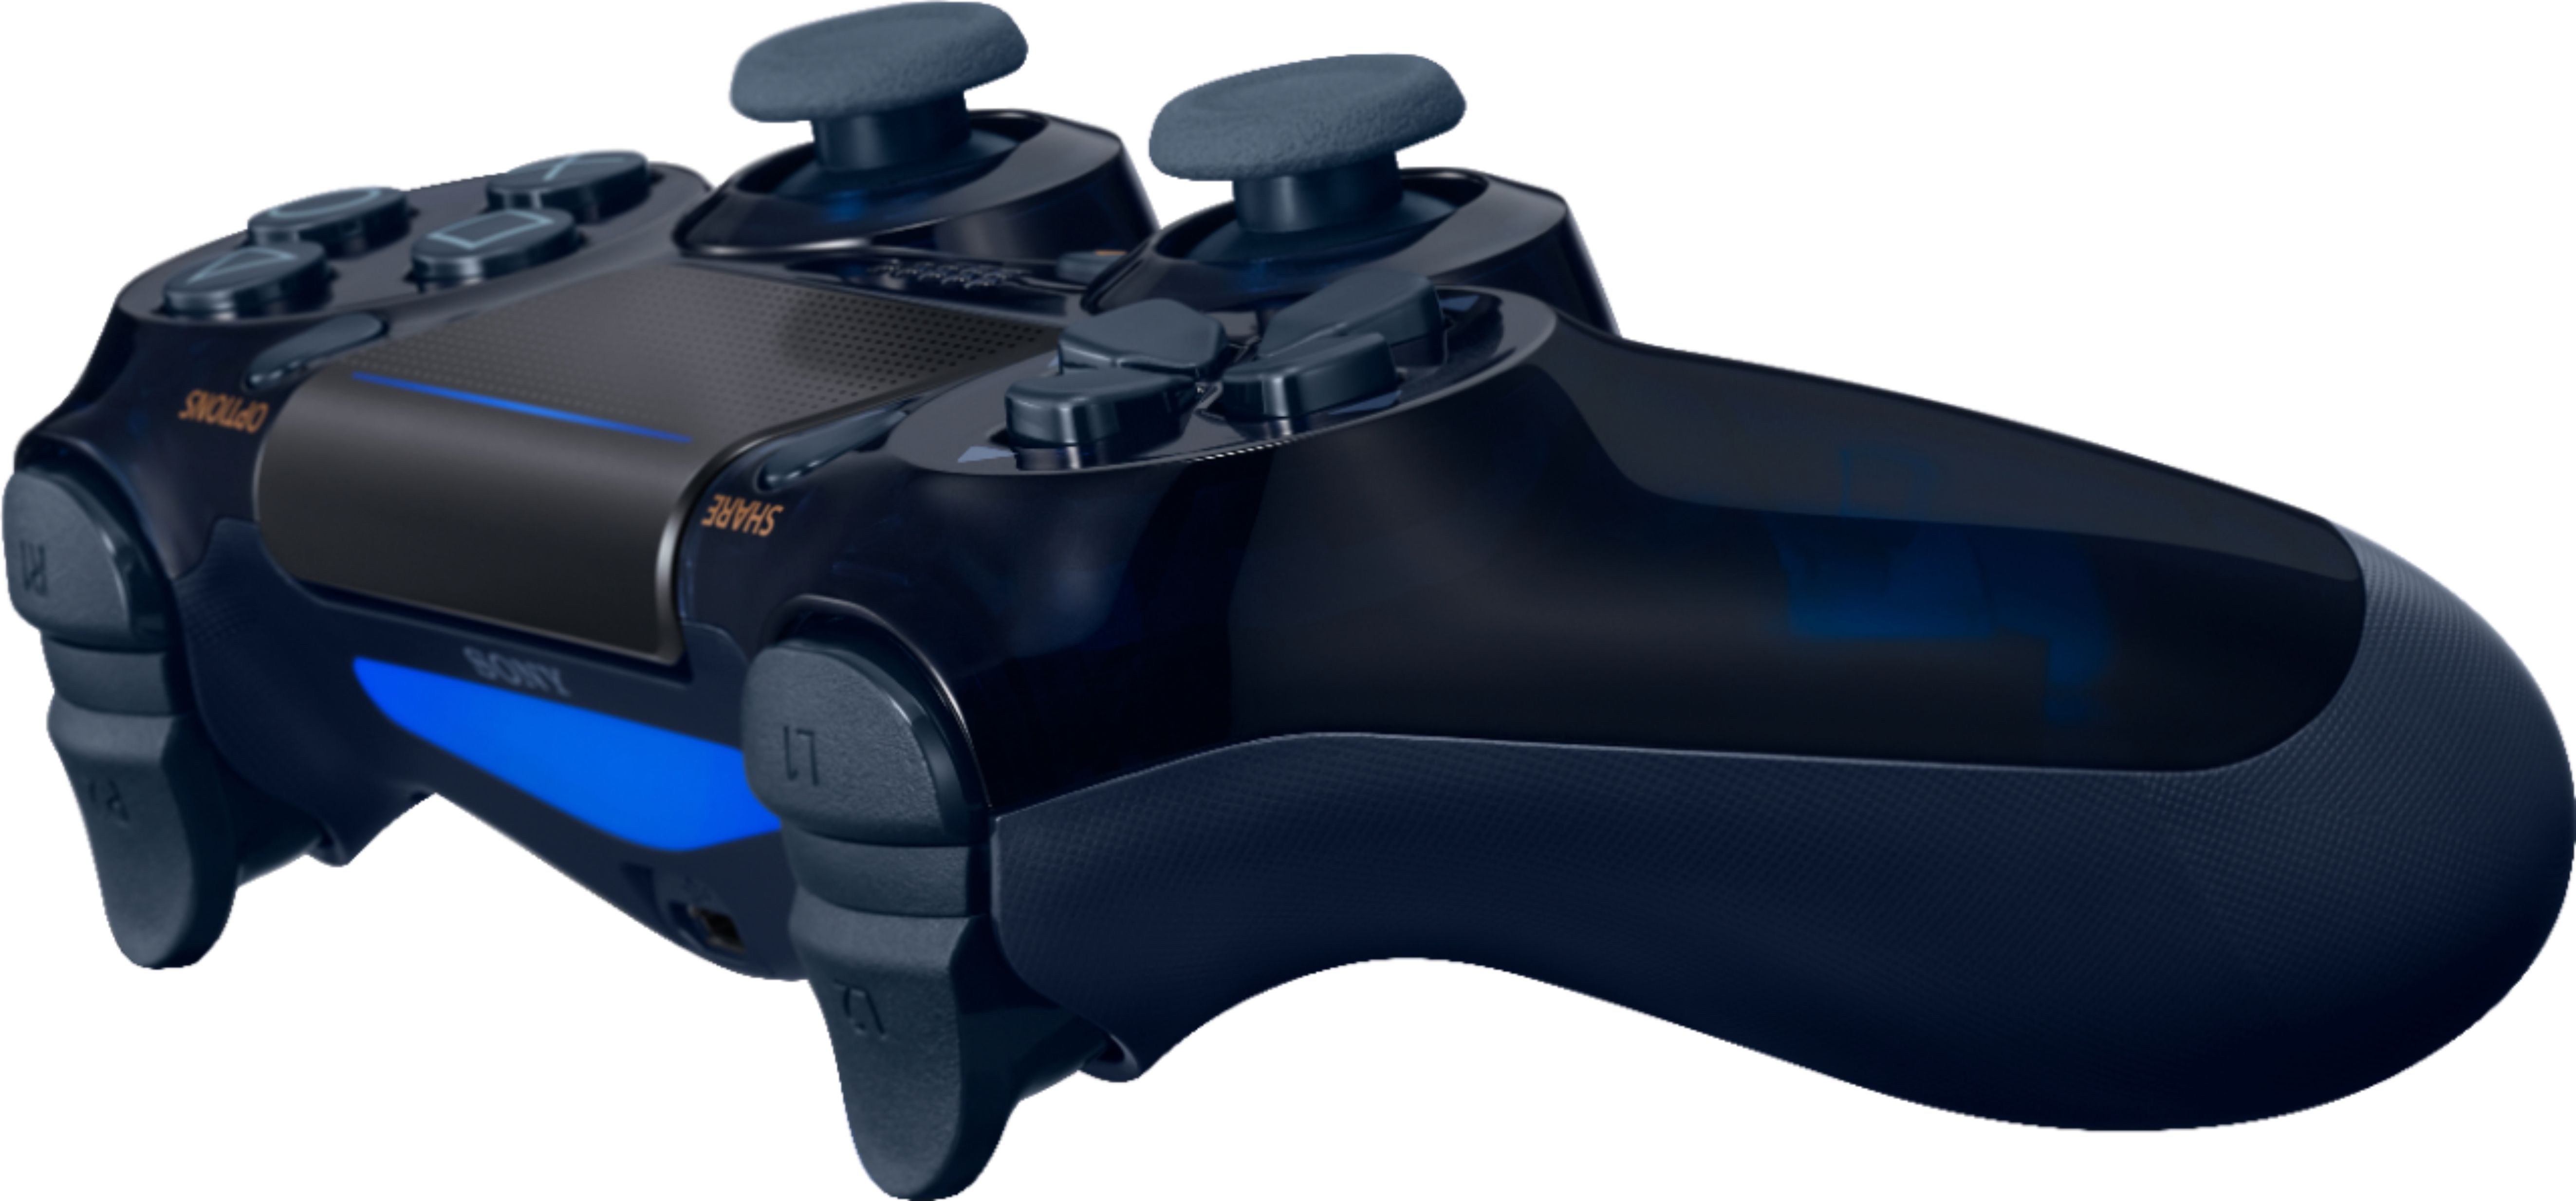 Best Buy: 500 Million Limited Edition DualShock 4 Wireless for Sony PlayStation 4